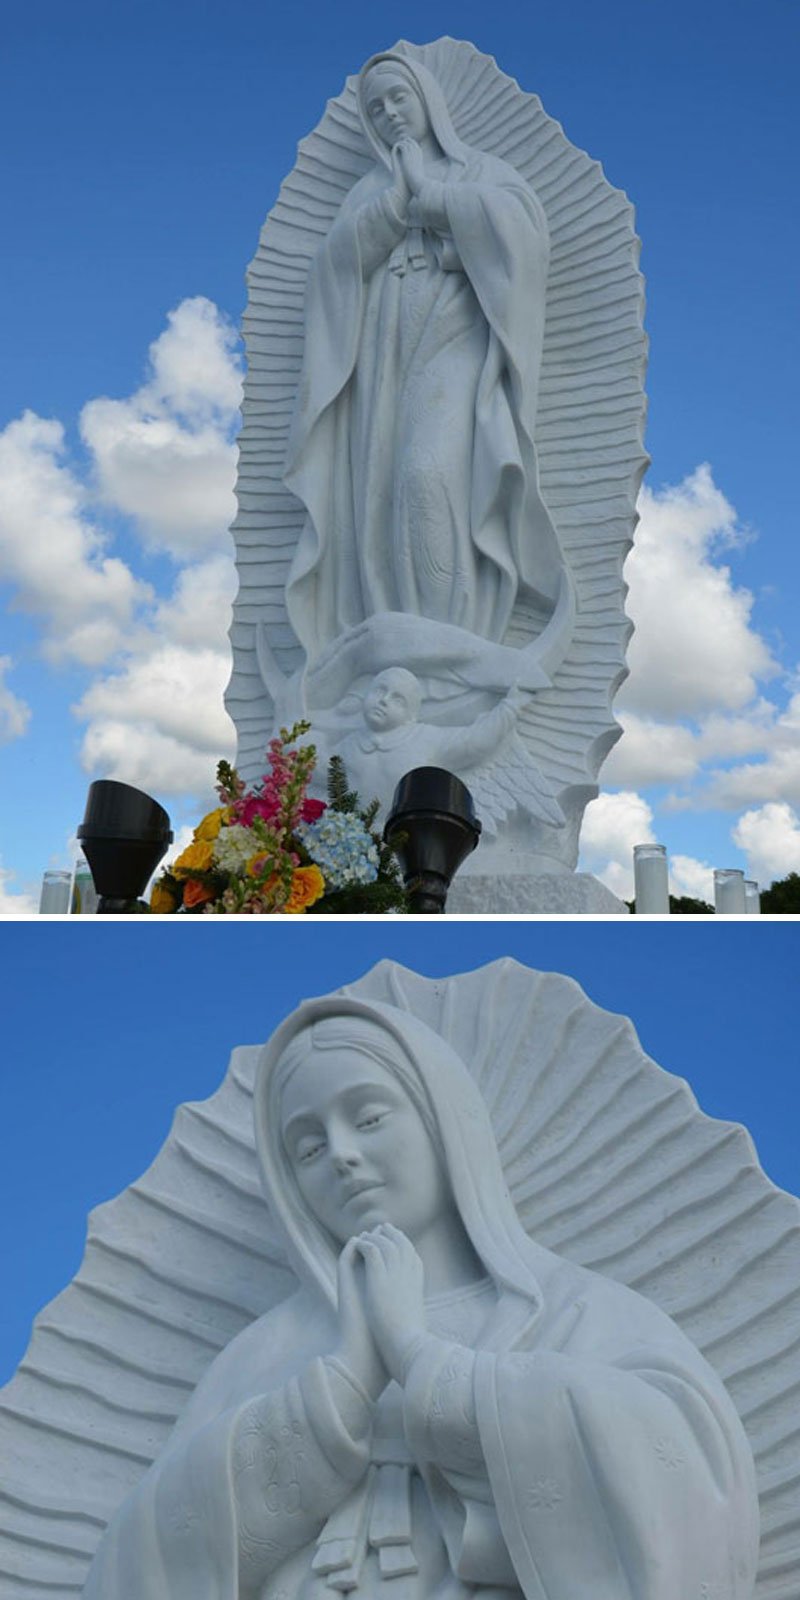 Marble Sculpture of the Virgin Mary of Guadalupe